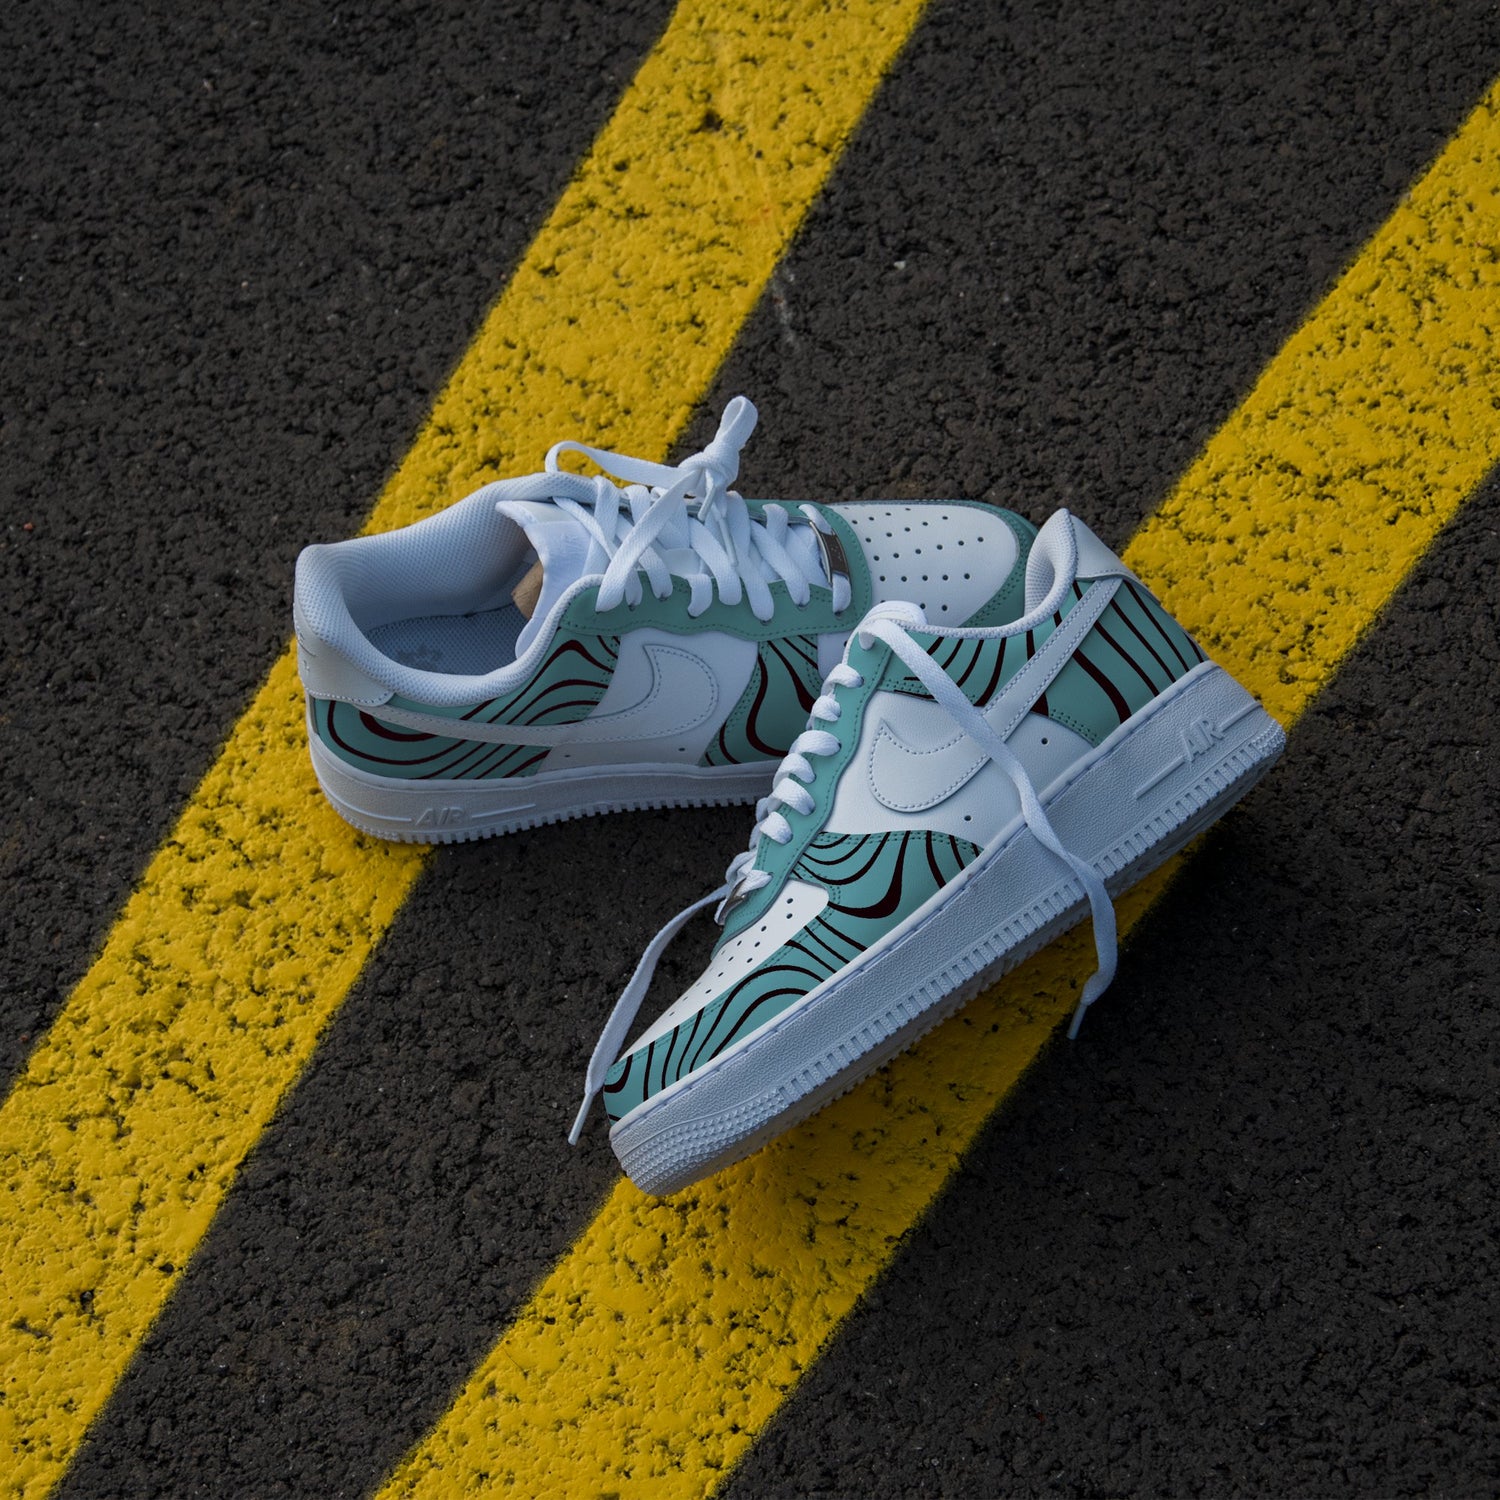 The image is of a Custom Nike Air force 1 sneaker on a street background. The white custom nike sneaker have a green and black design all over the sneakers.  